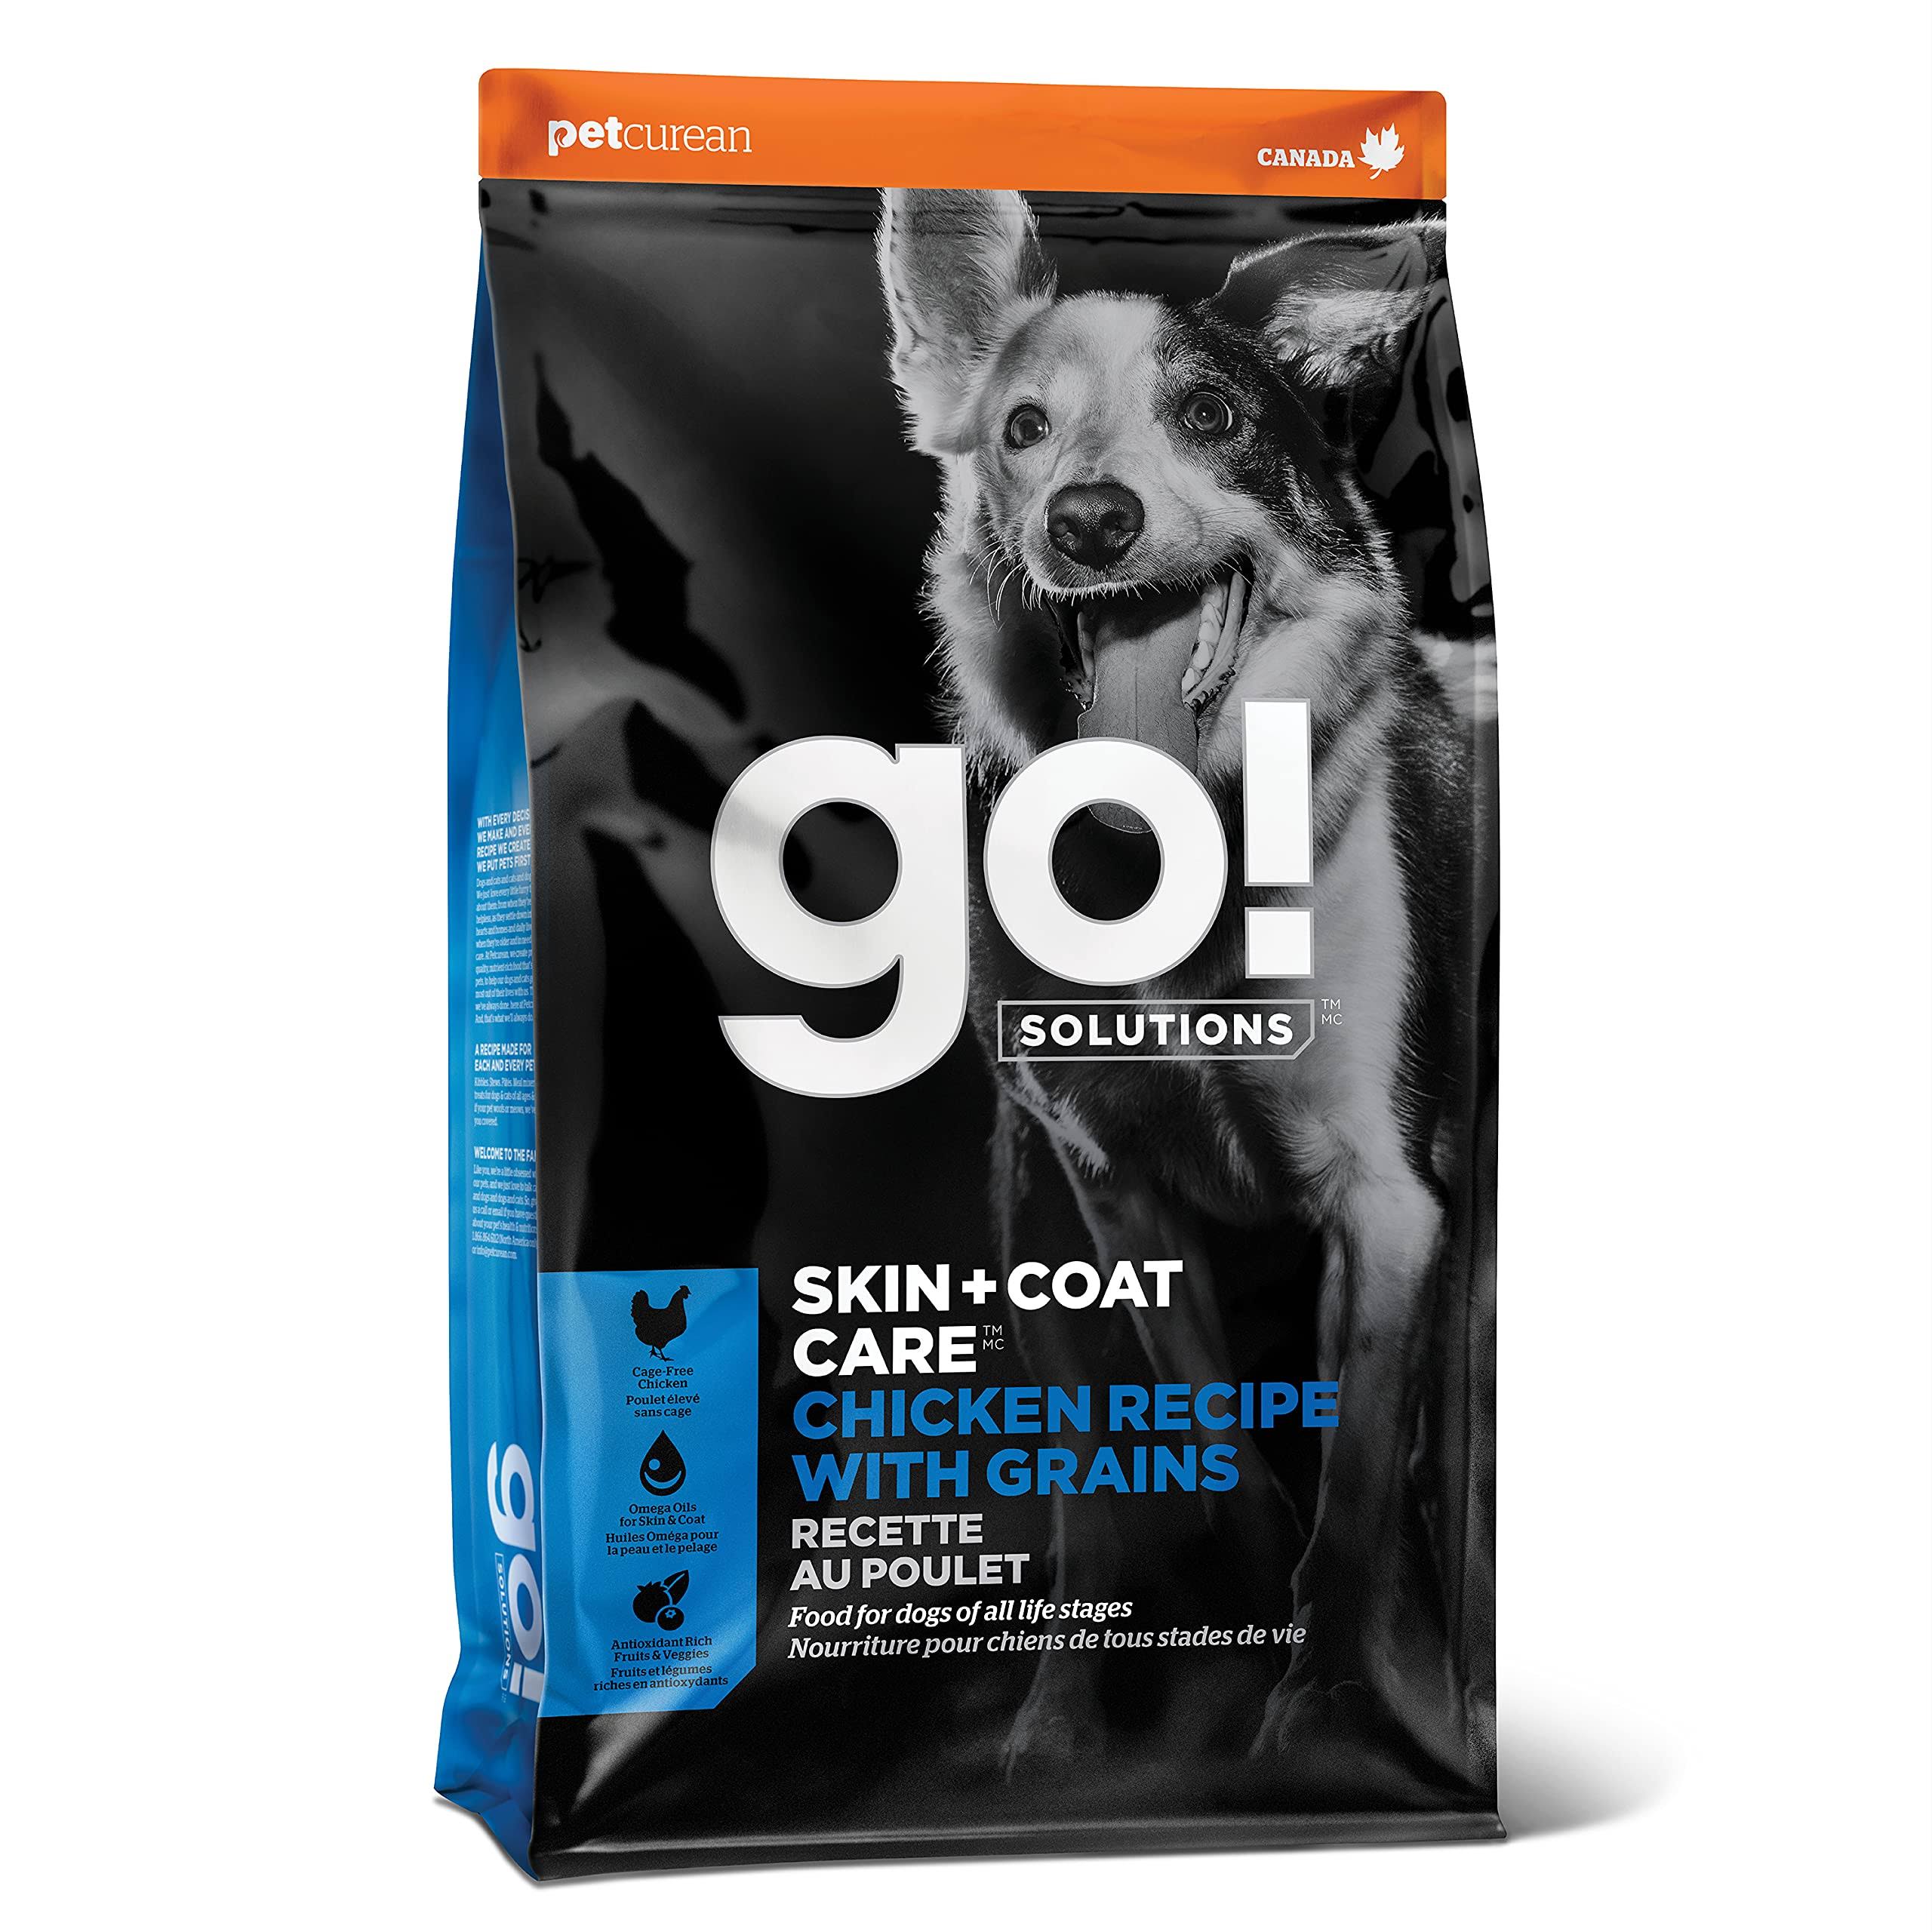 Go! Solutions Skin + Coat Care Chicken Recipe Dry Dog Food, 25 Pounds